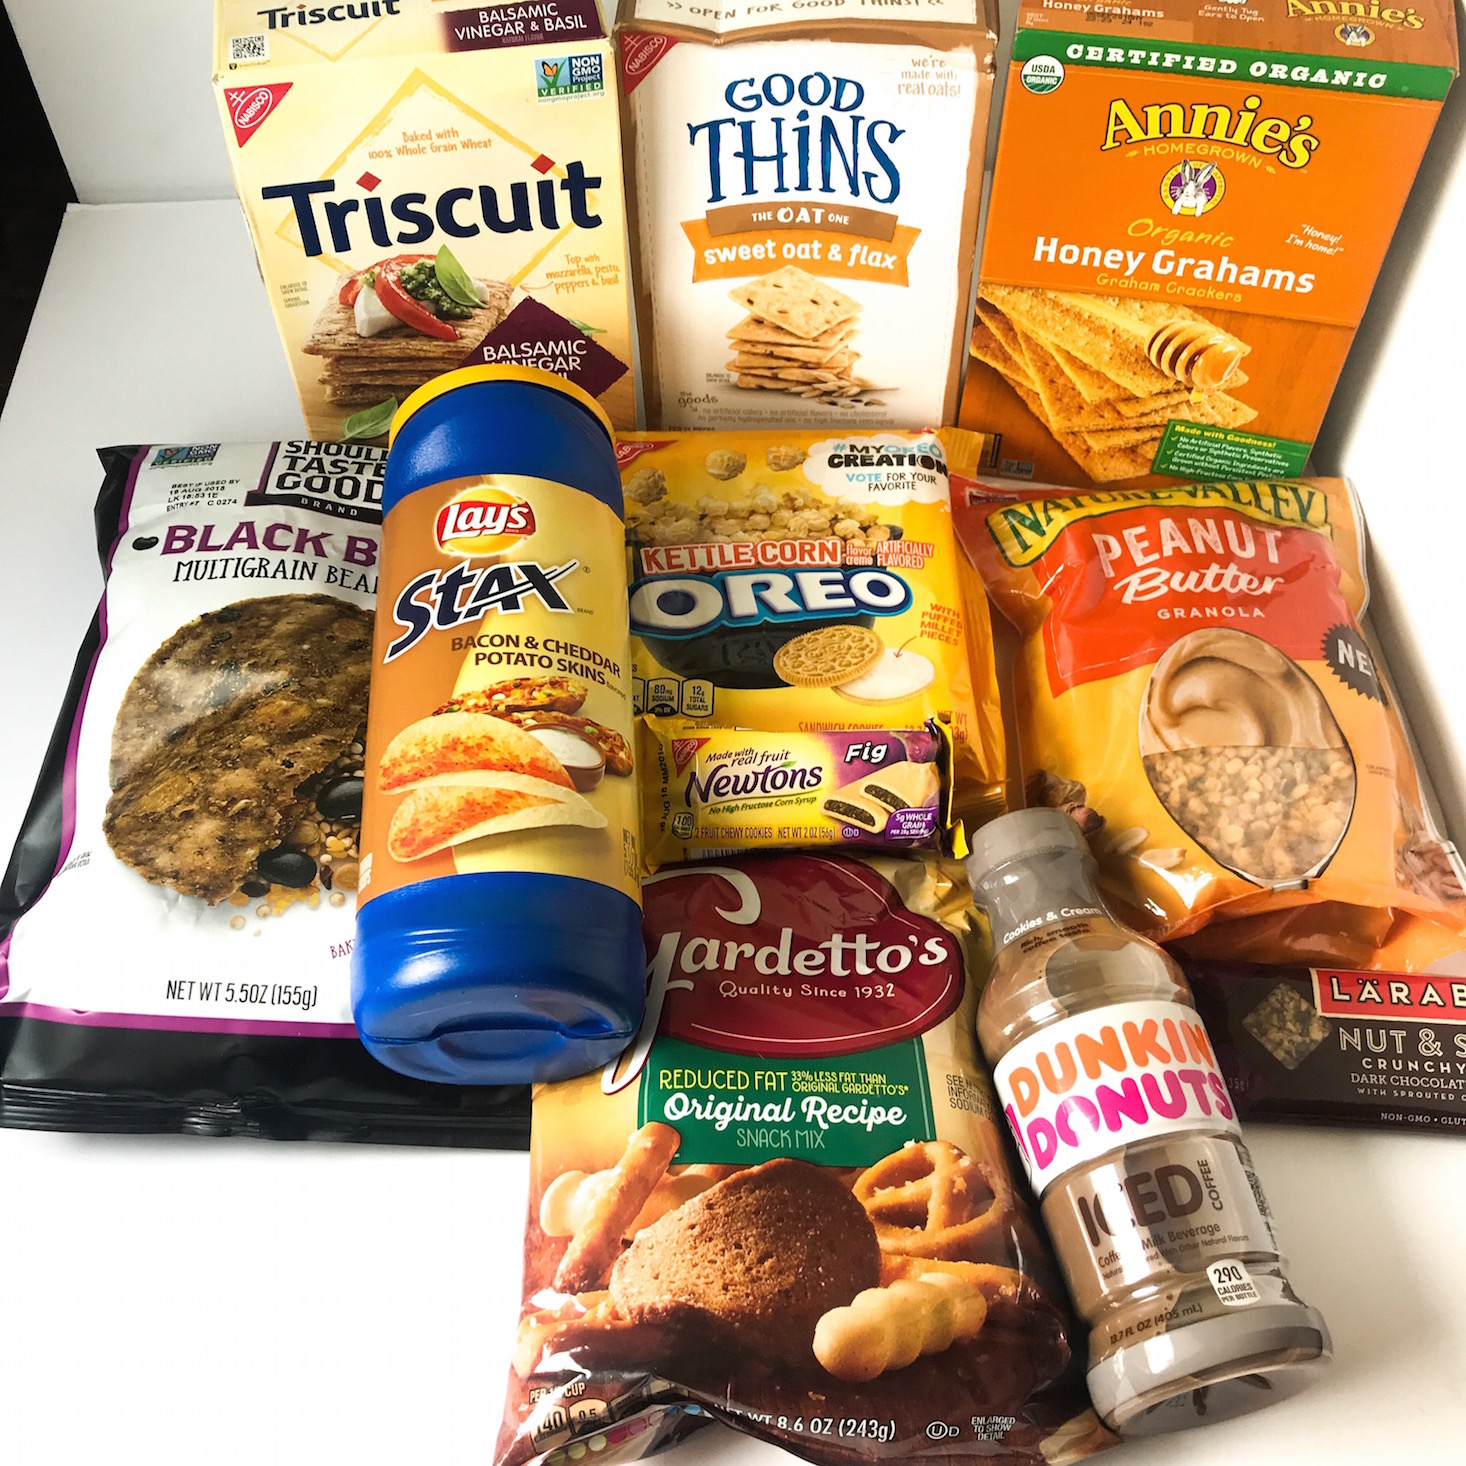 Monthly Box of Food & Snacks Review – August 2018